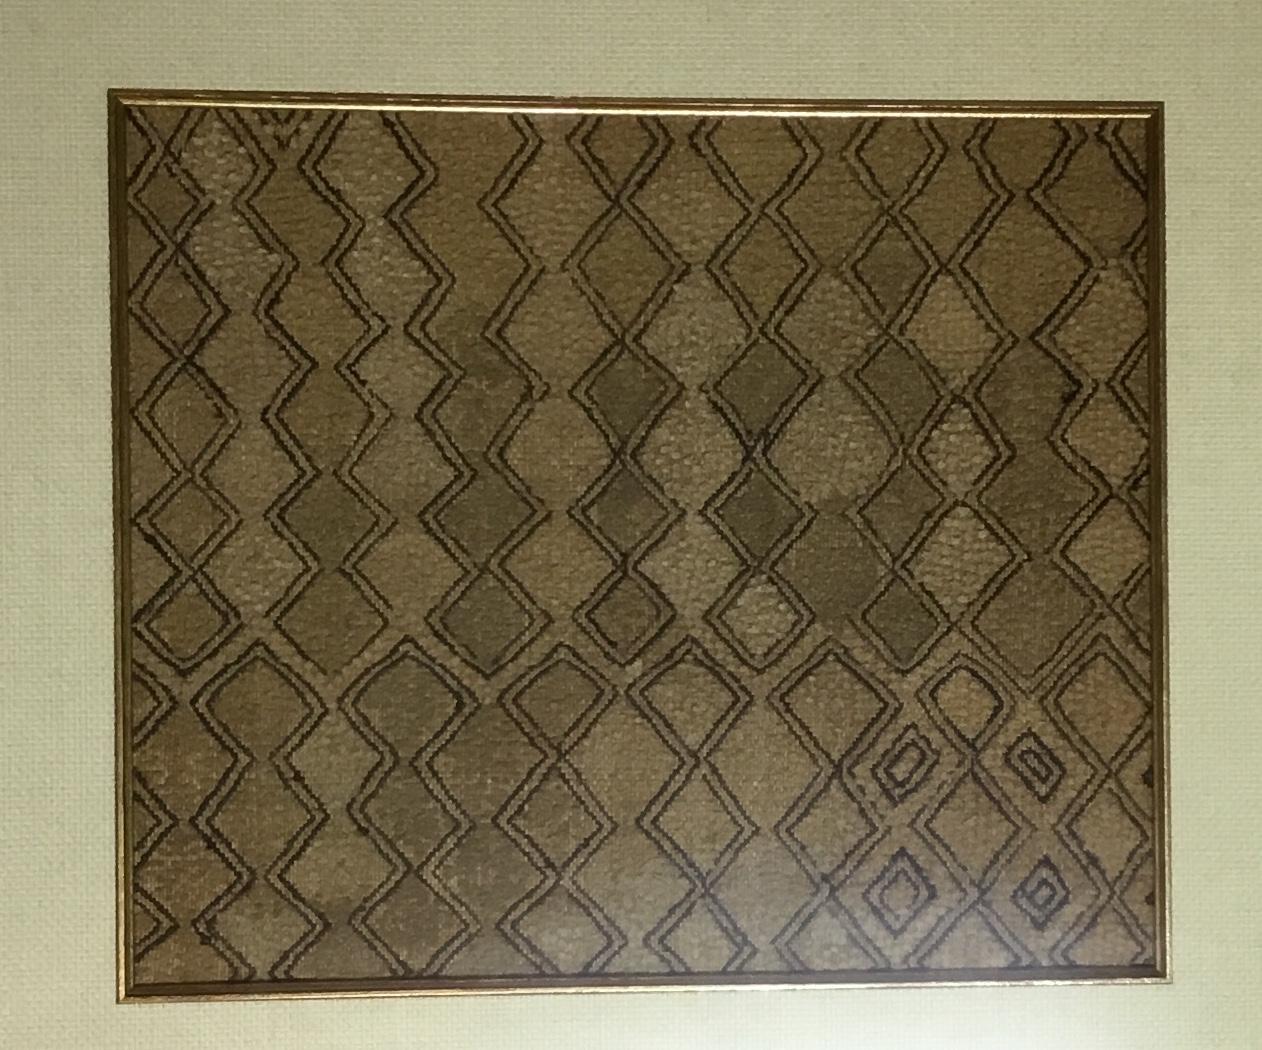 Pair of Framed Handwoven Faffia Cloth from Congo 2